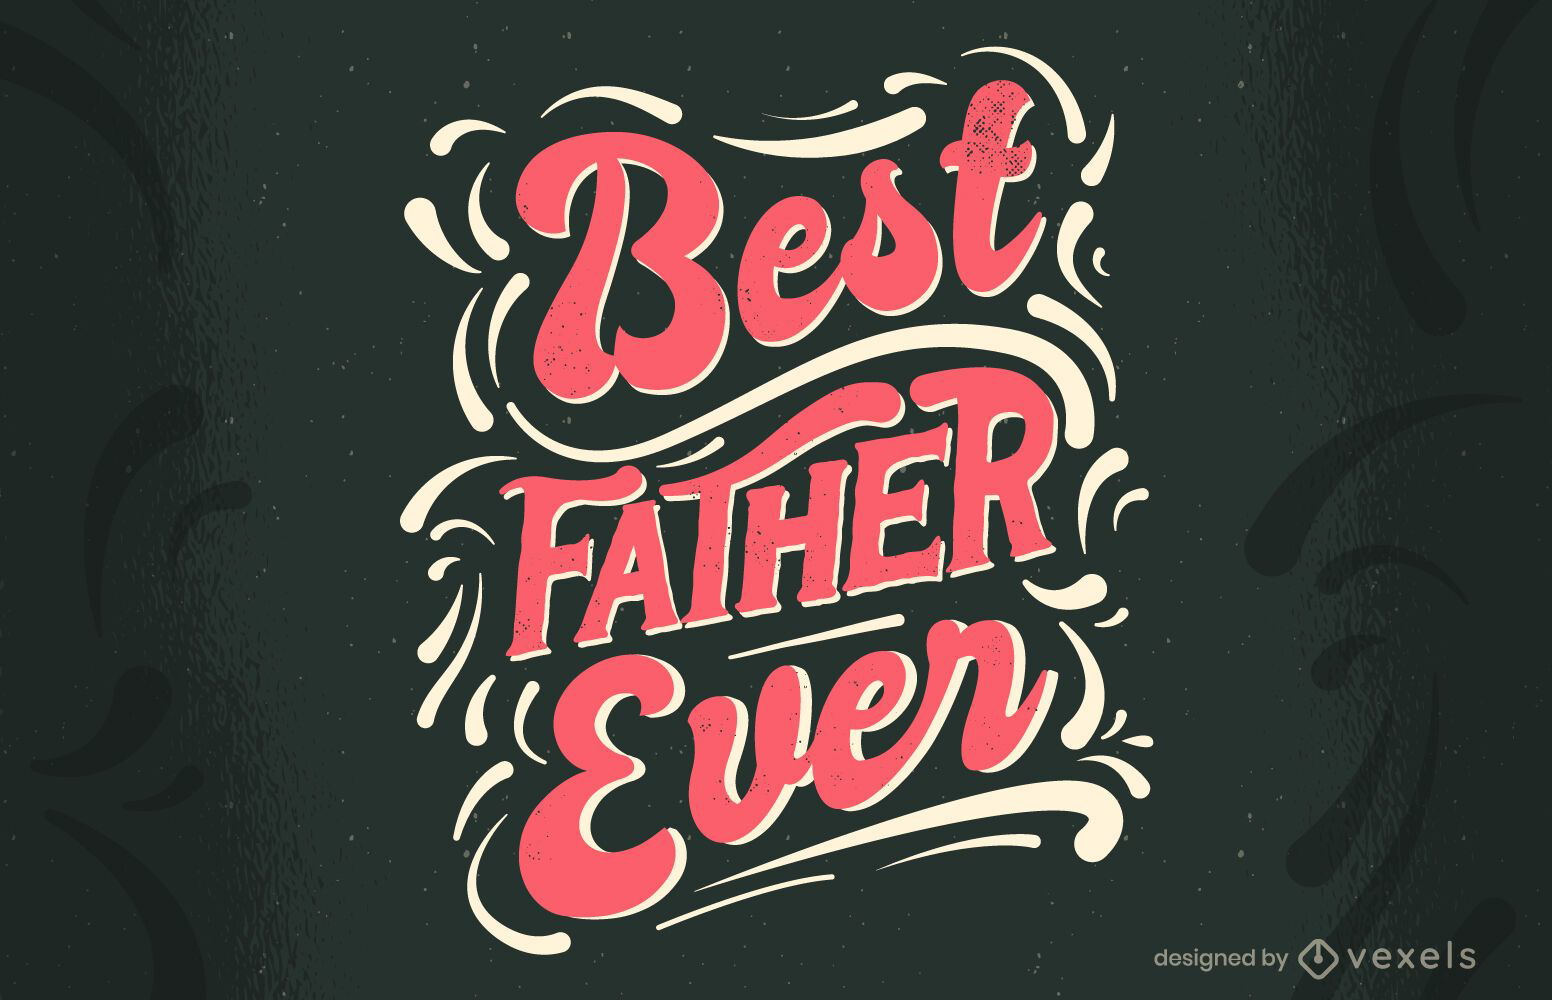 Best father ever Father's Day lettering